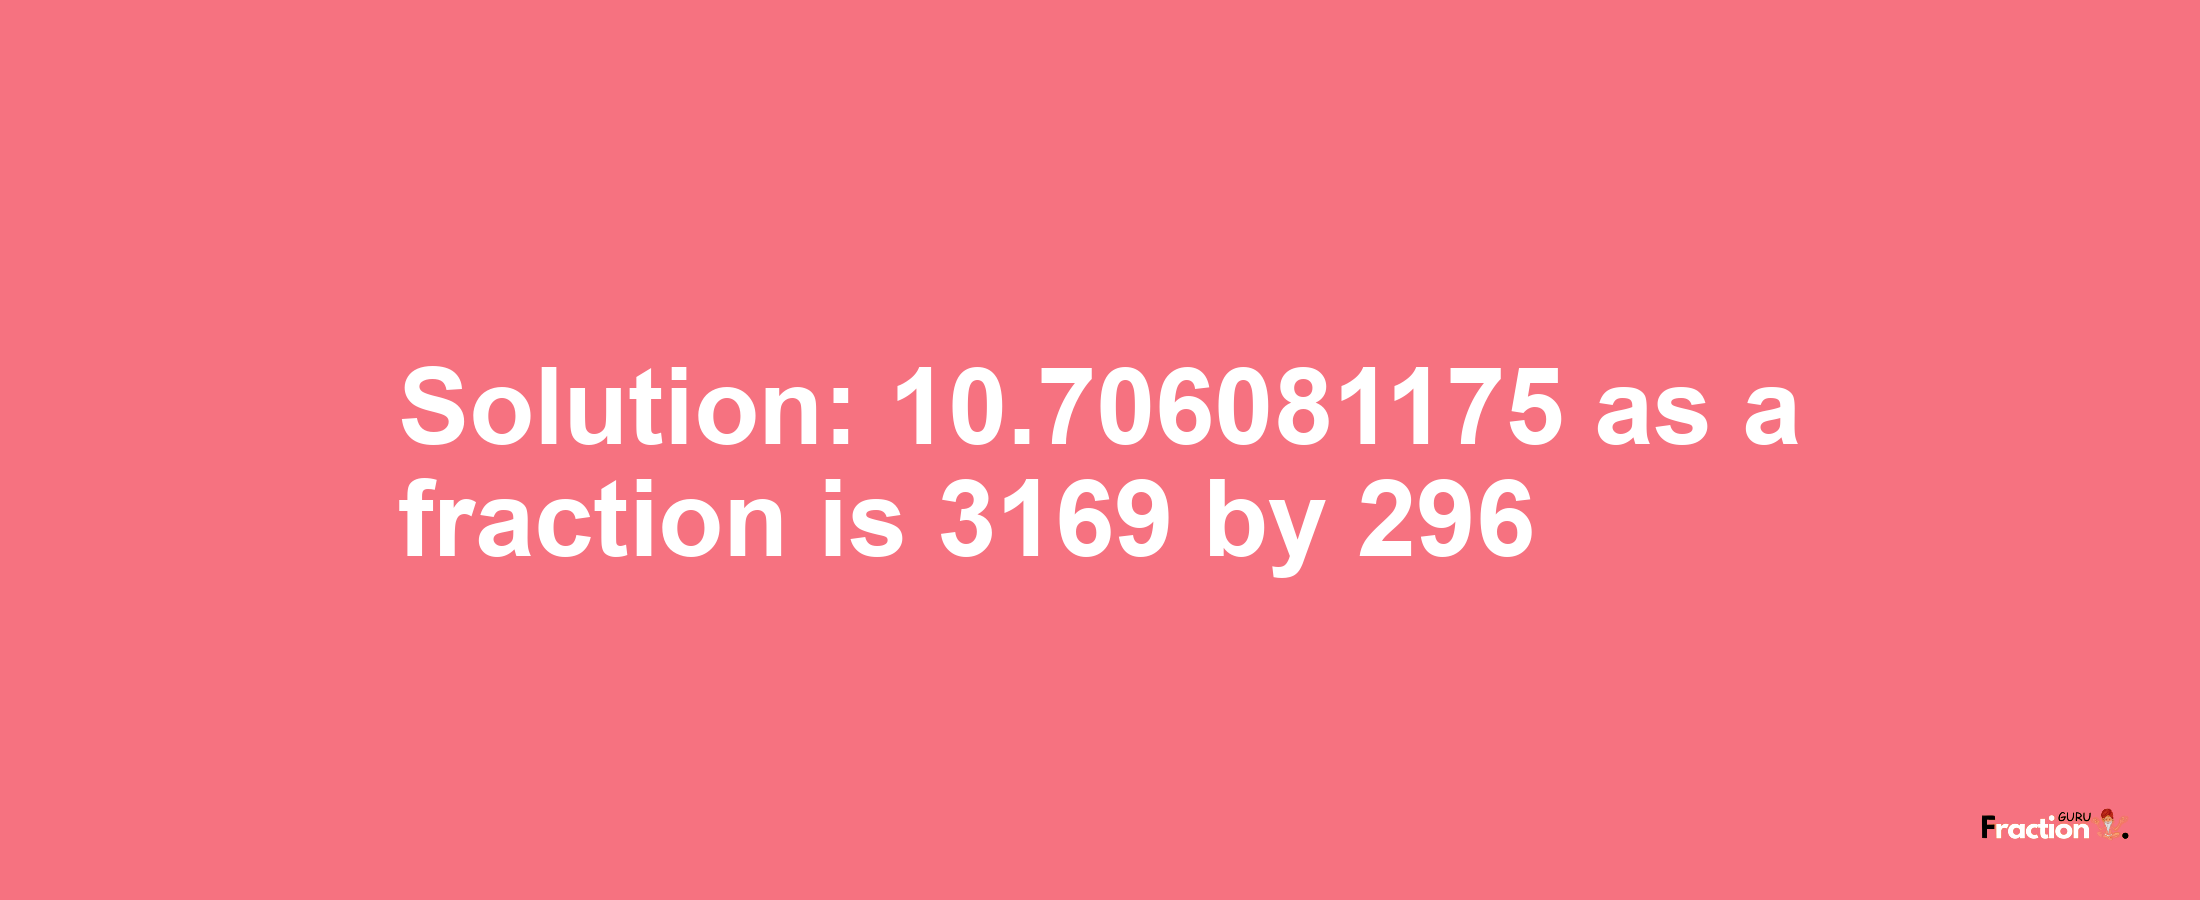 Solution:10.706081175 as a fraction is 3169/296